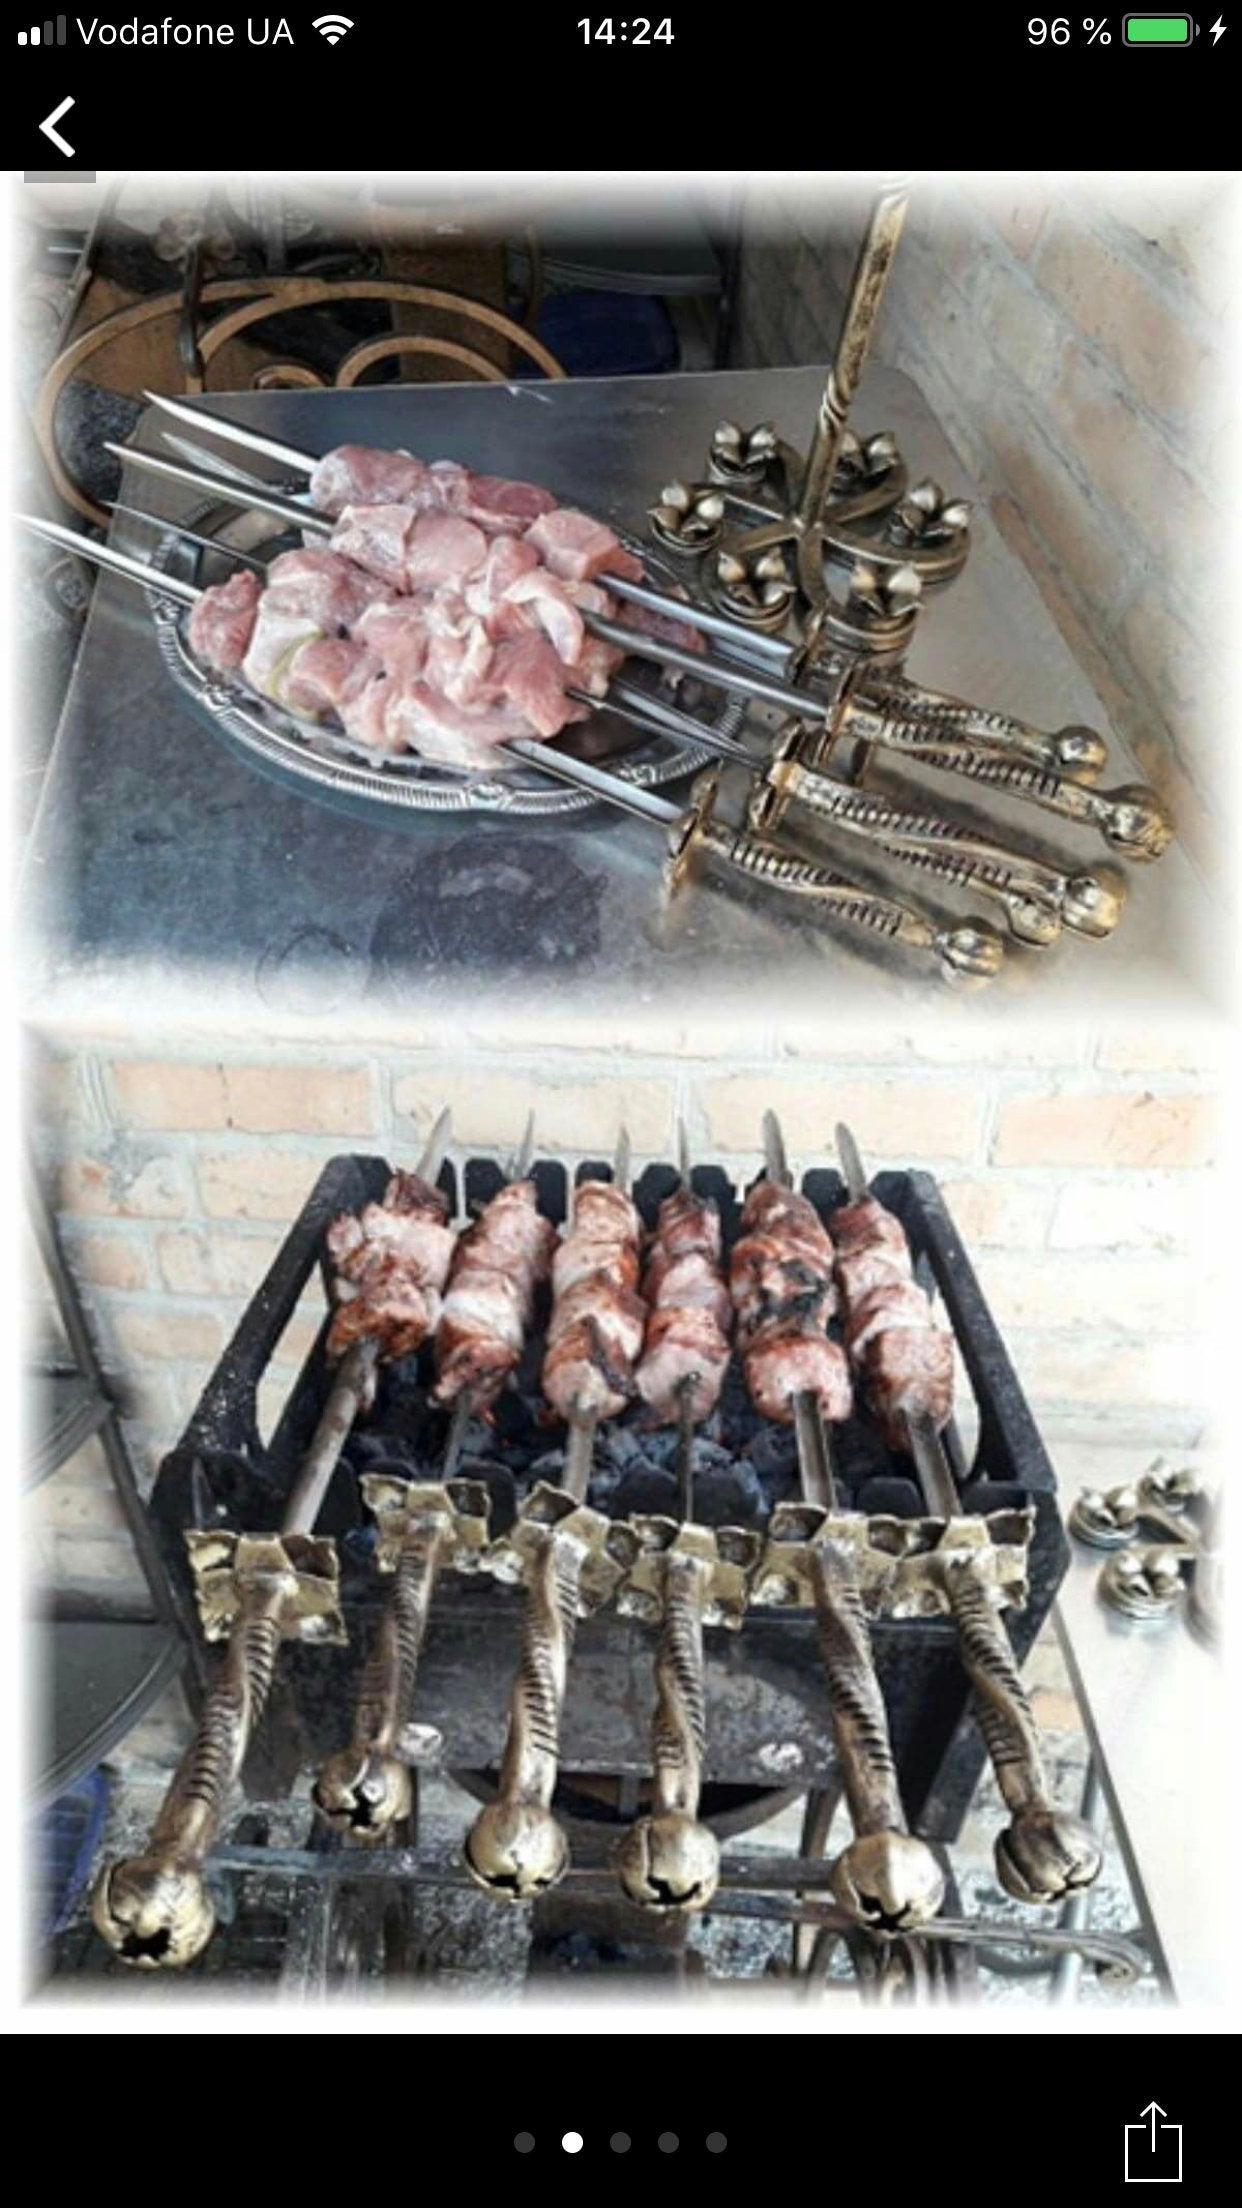 Skewers, steel gift, iron gift, grilling gift, barbecue, BBQ, picnic, gift for dad, Fathers day gift, party decor, birthday gift, grill gift